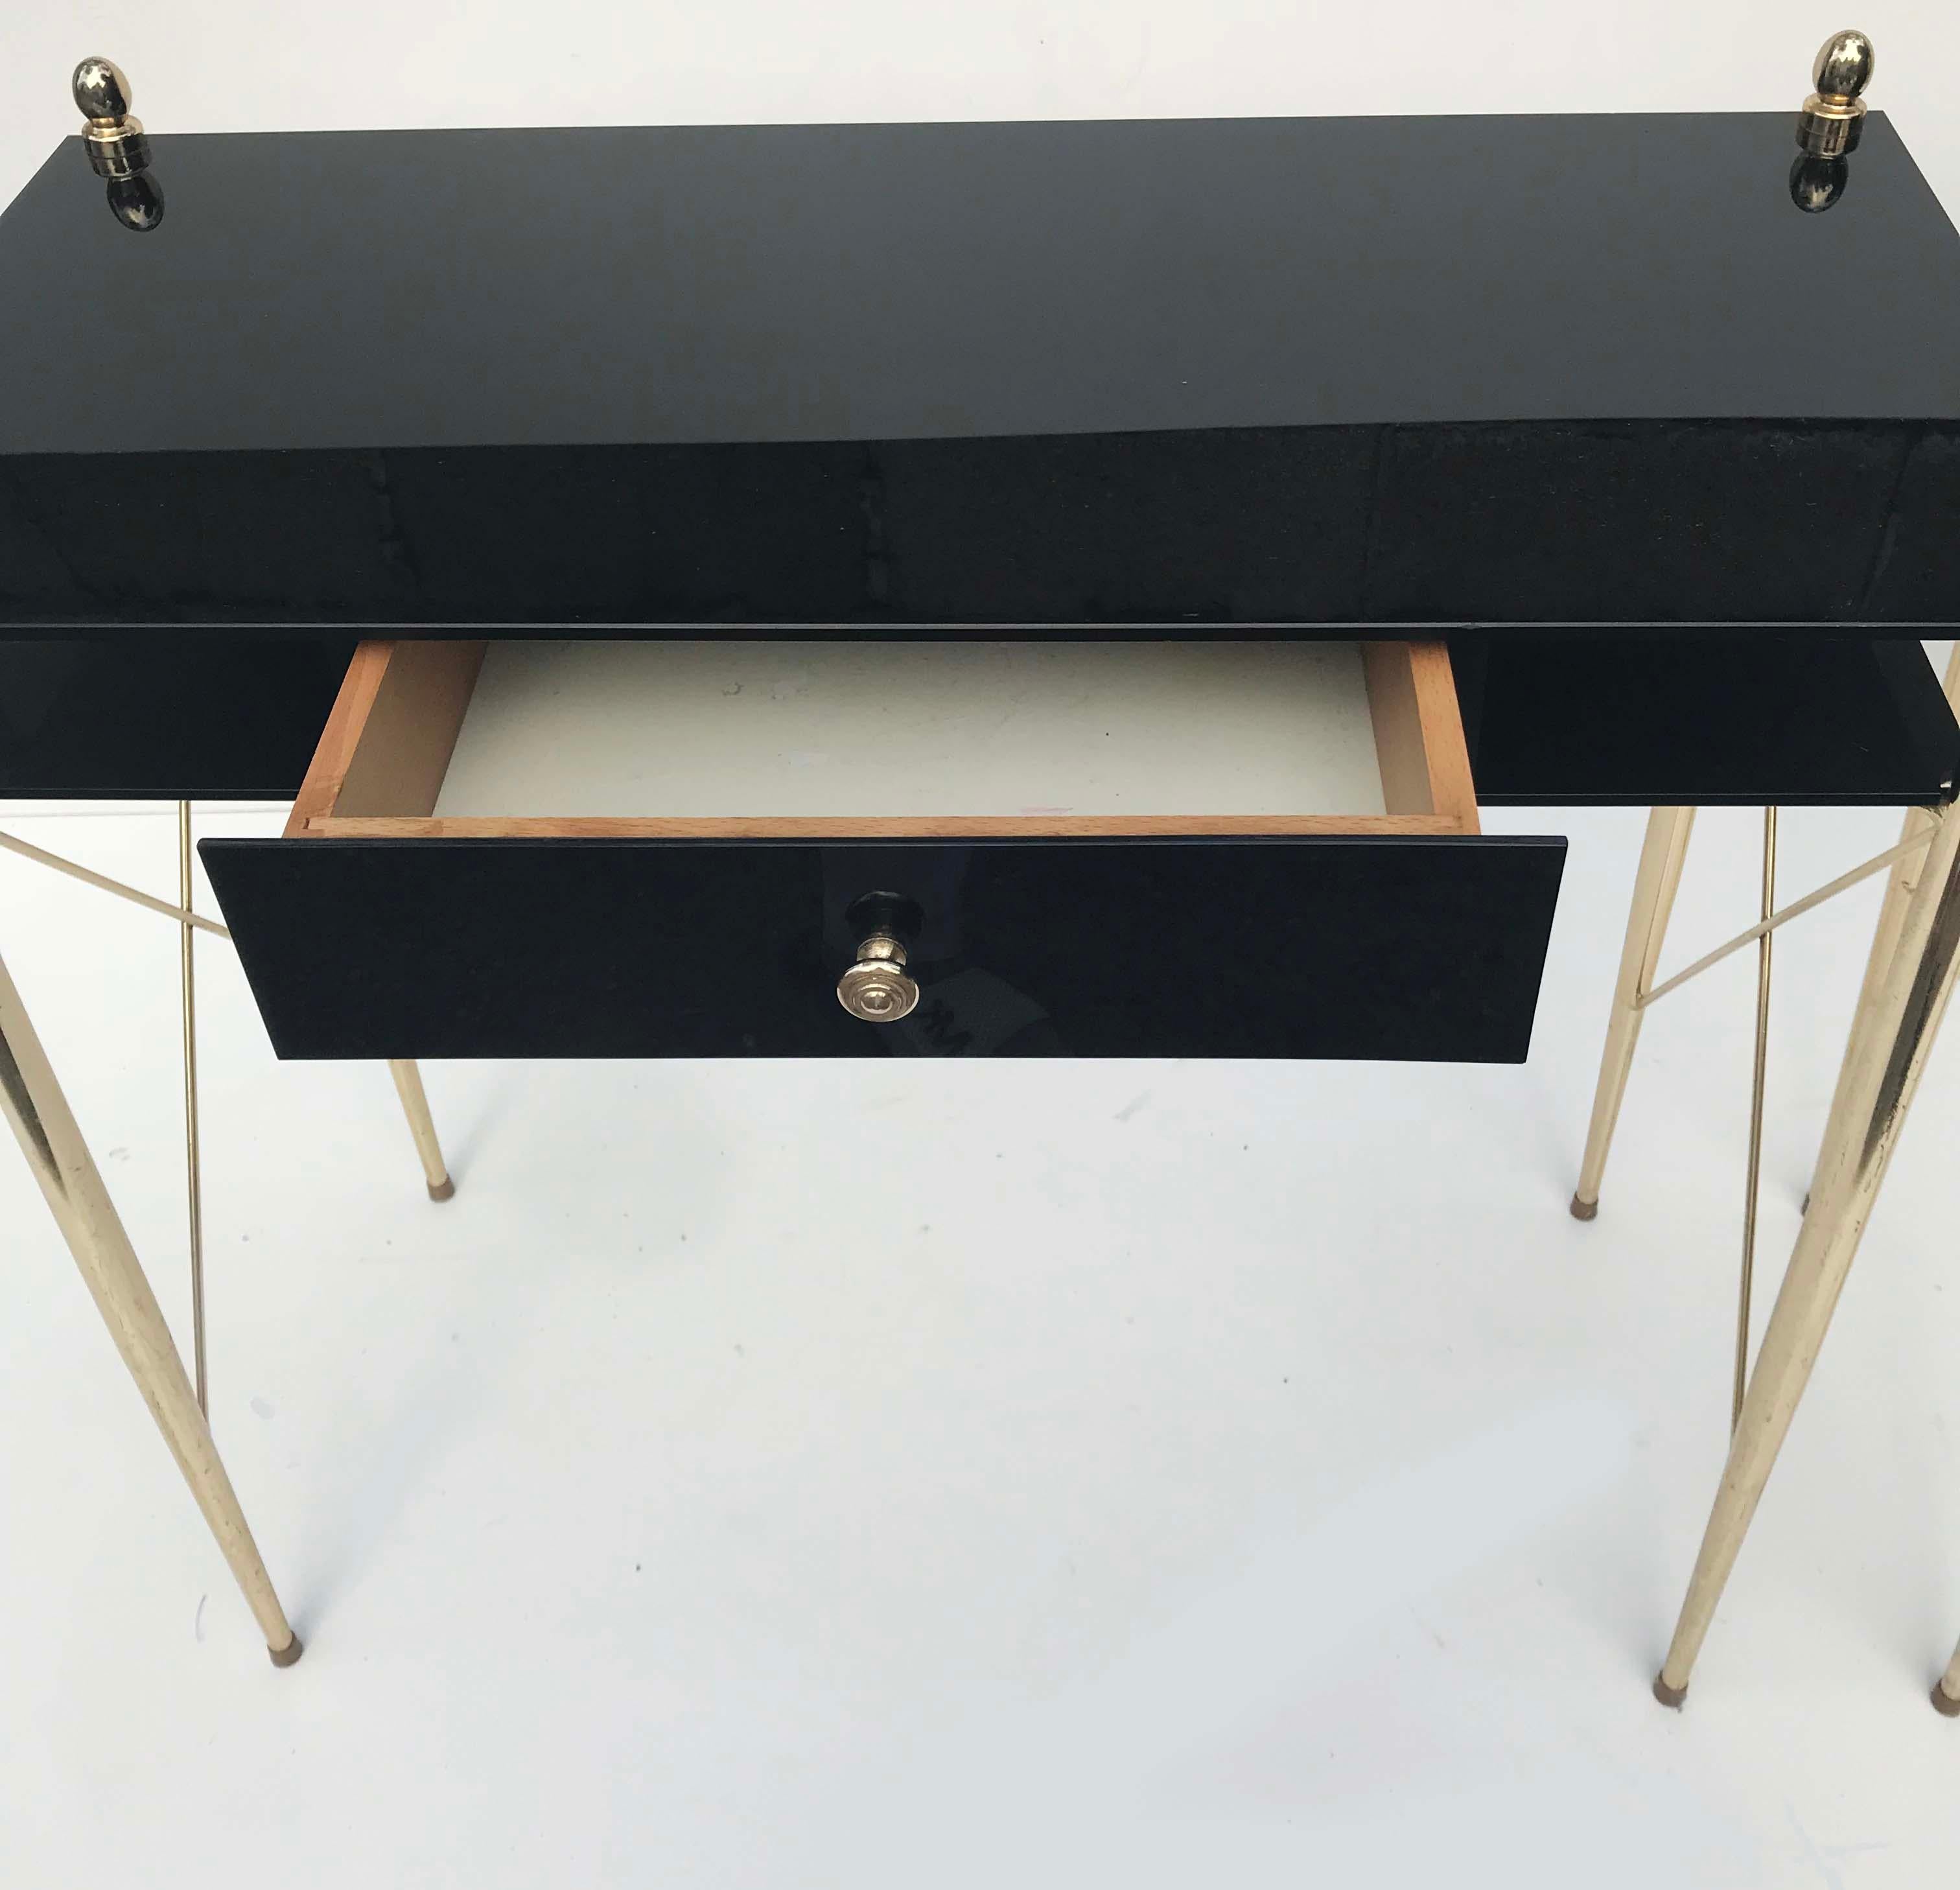 Superb and rare pair of black opaline consoles in the style of Jacques Adnet.
1 central drawer, brass ornaments.
29